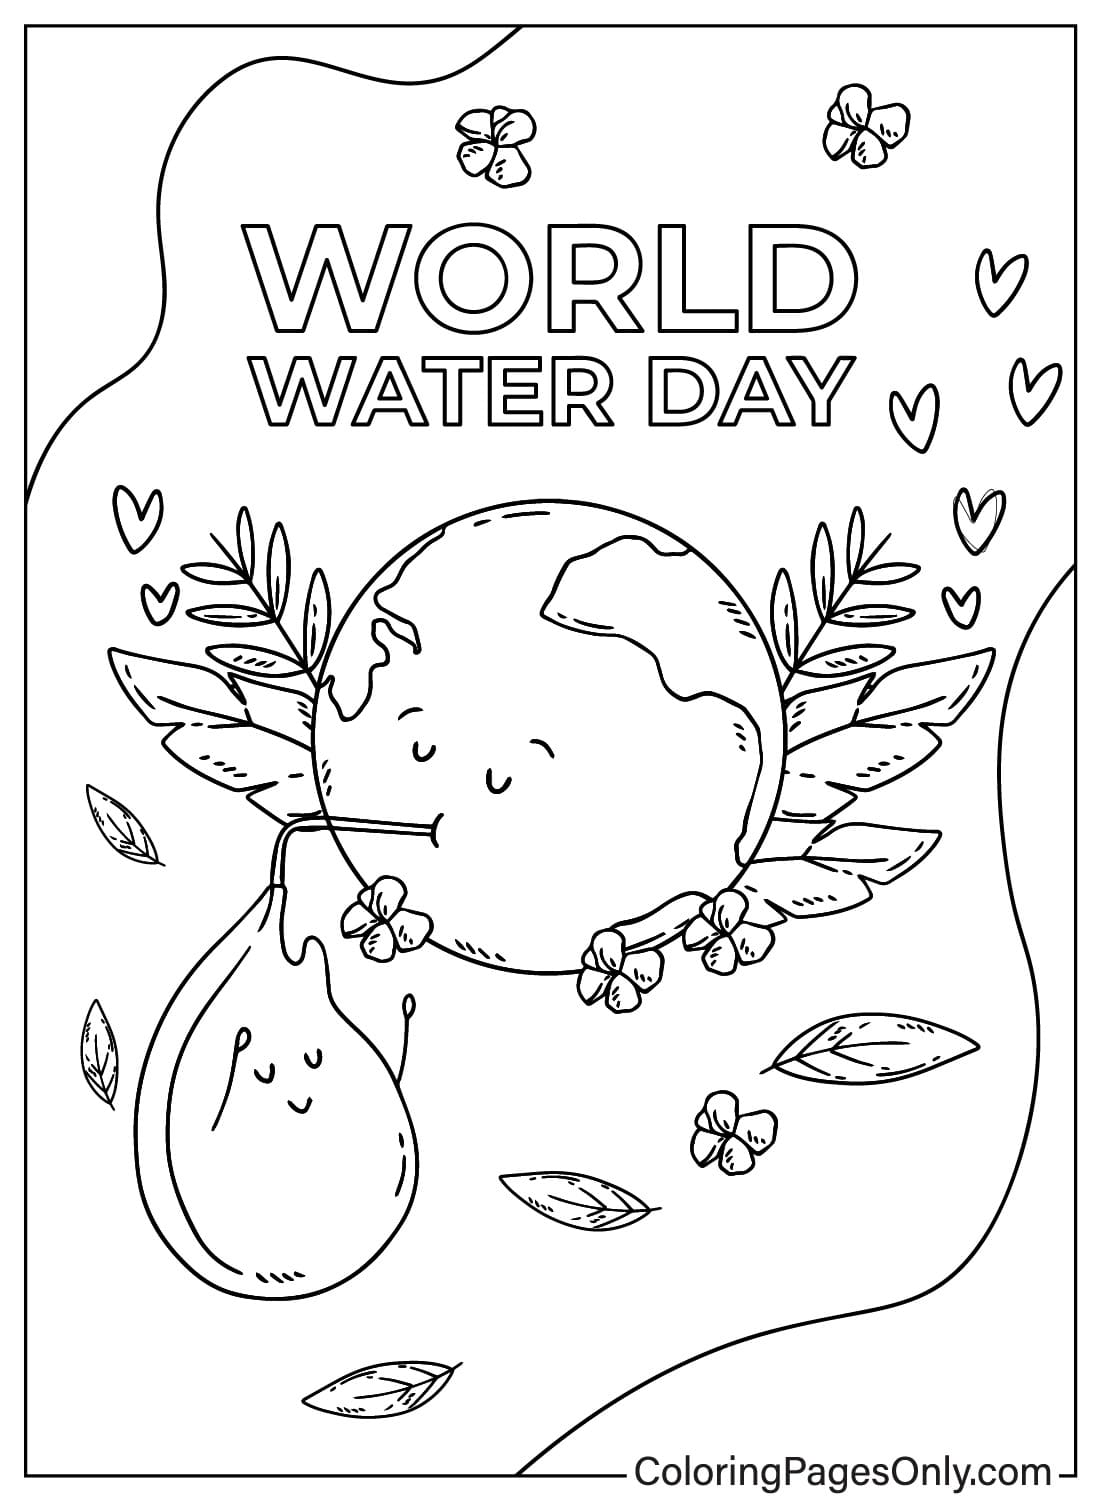 Earth and World Water Day Coloring Page from World Water Day